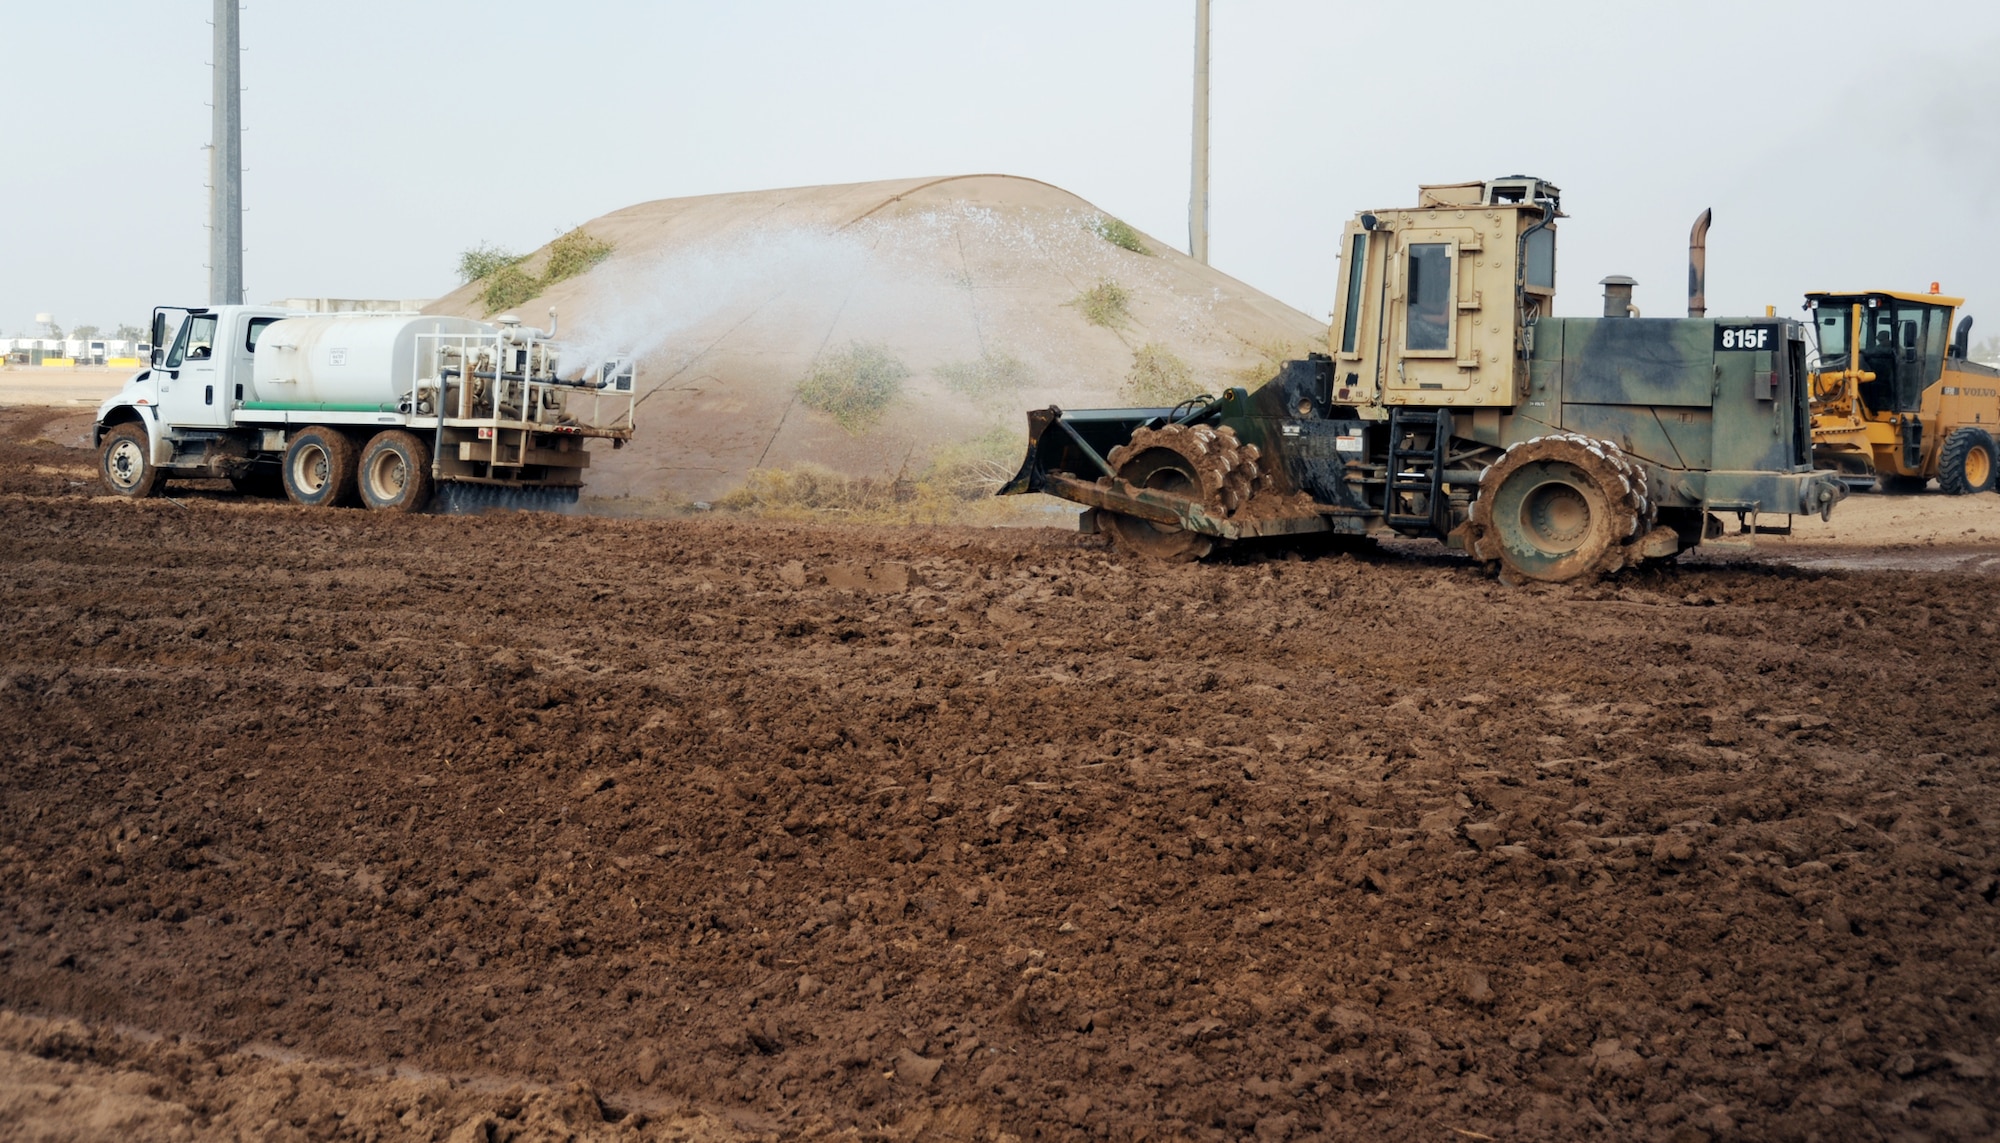 JOINT BASE BALAD, Iraq -- Airmen of the 732nd Expeditionary Civil Engineer Squadron use a 1500 gallon water truck to soften the earth for a sheep's foot roller, as it compacts the soil for a new container repair yard Nov. 2, 2009. By using containers repaired here instead of purchasing new ones, the projected savings total more than $100 million as military assets withdraw from Iraq. (U.S. Air Force photo/Senior Airman Christopher Hubenthal)